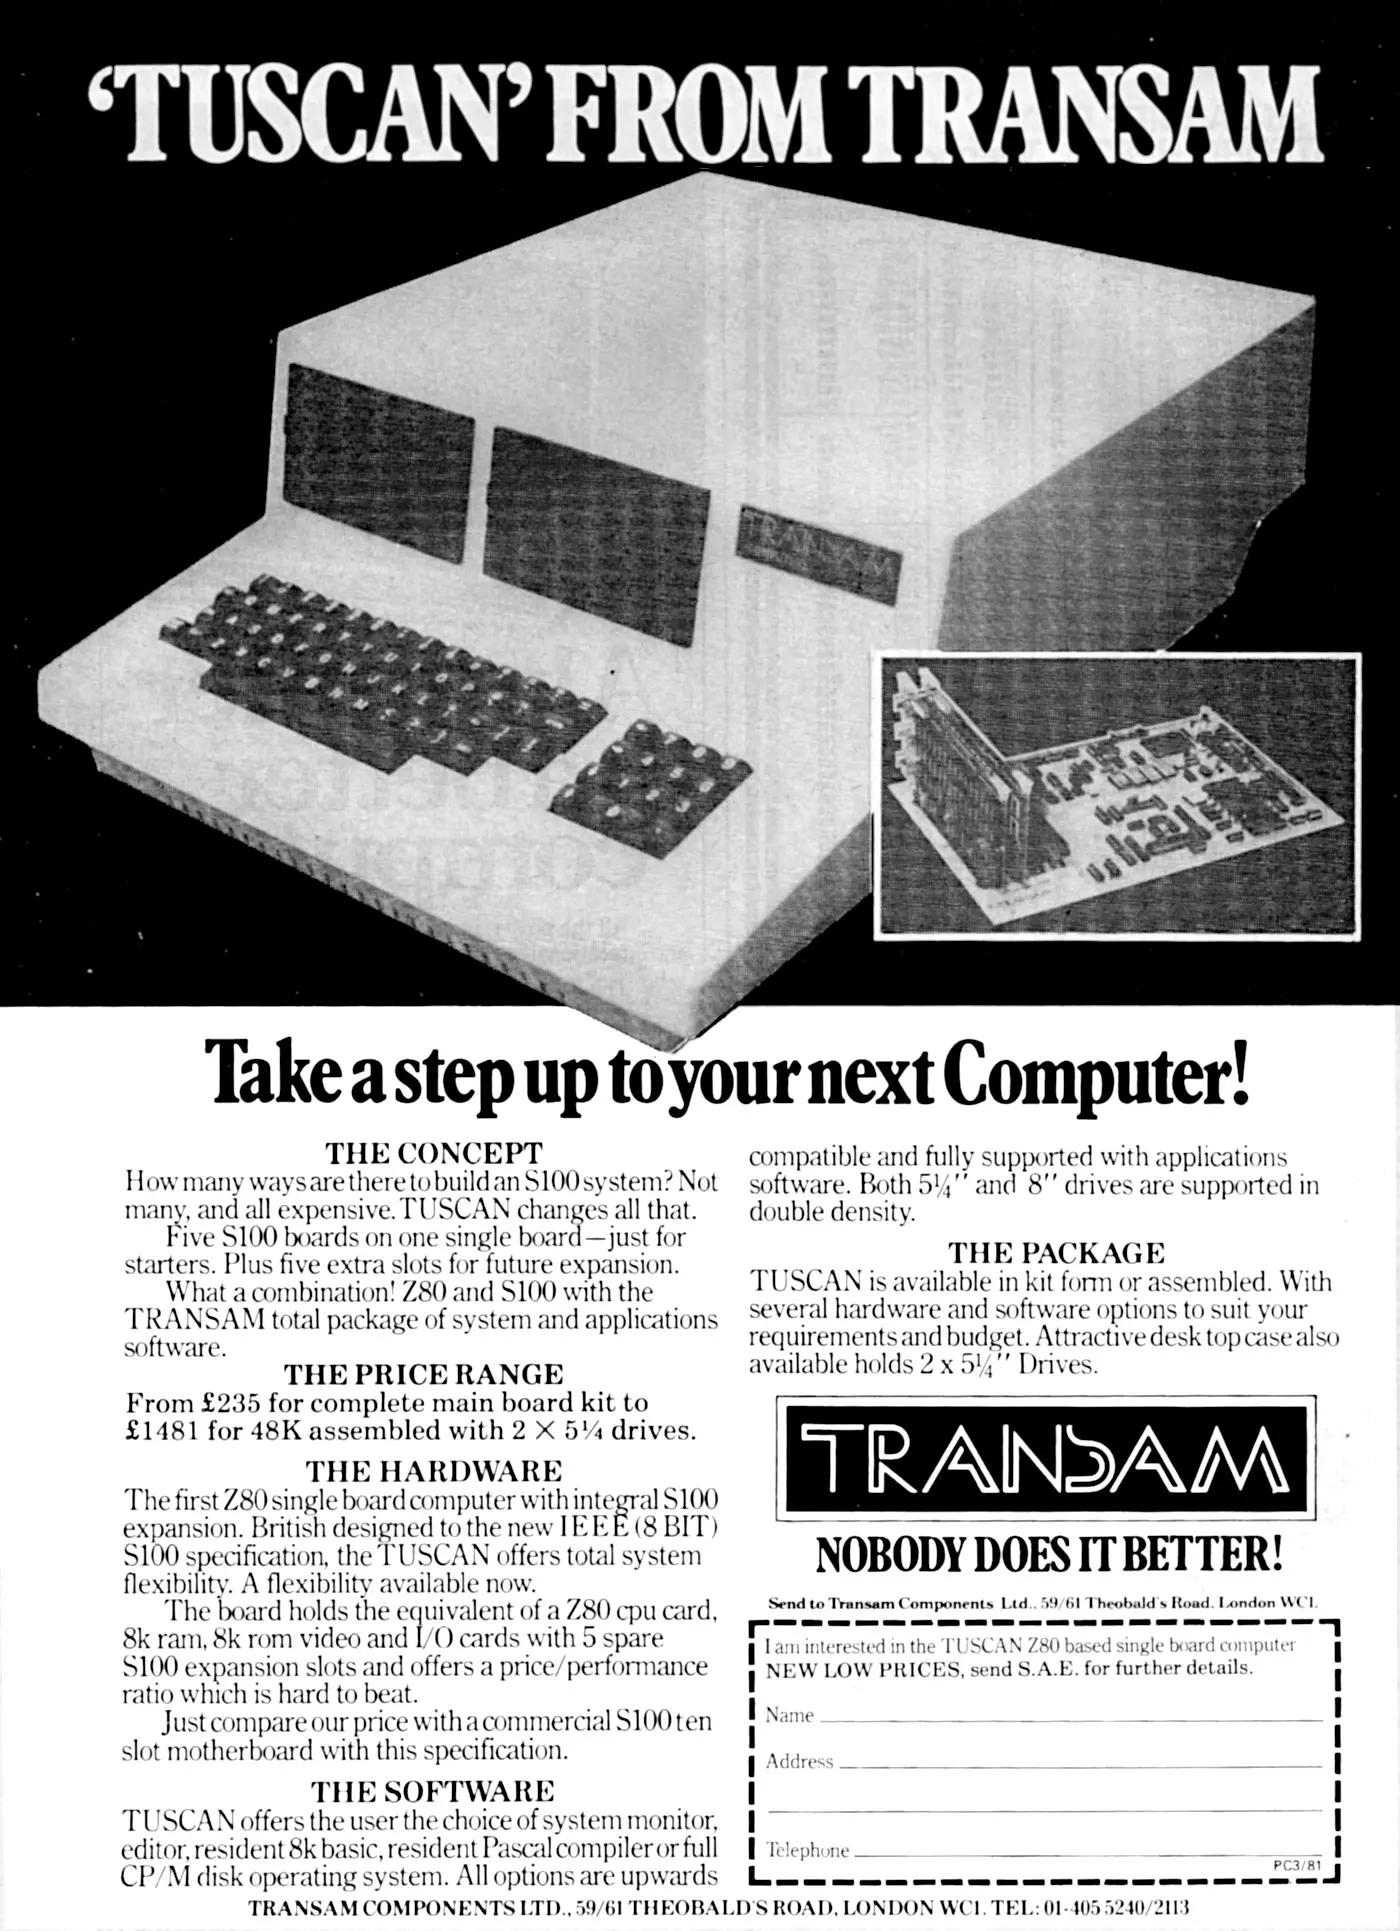 Transam Advert: Tuscan from Transam - Take a step up to your next computer!, from Personal Computer World, October 1980